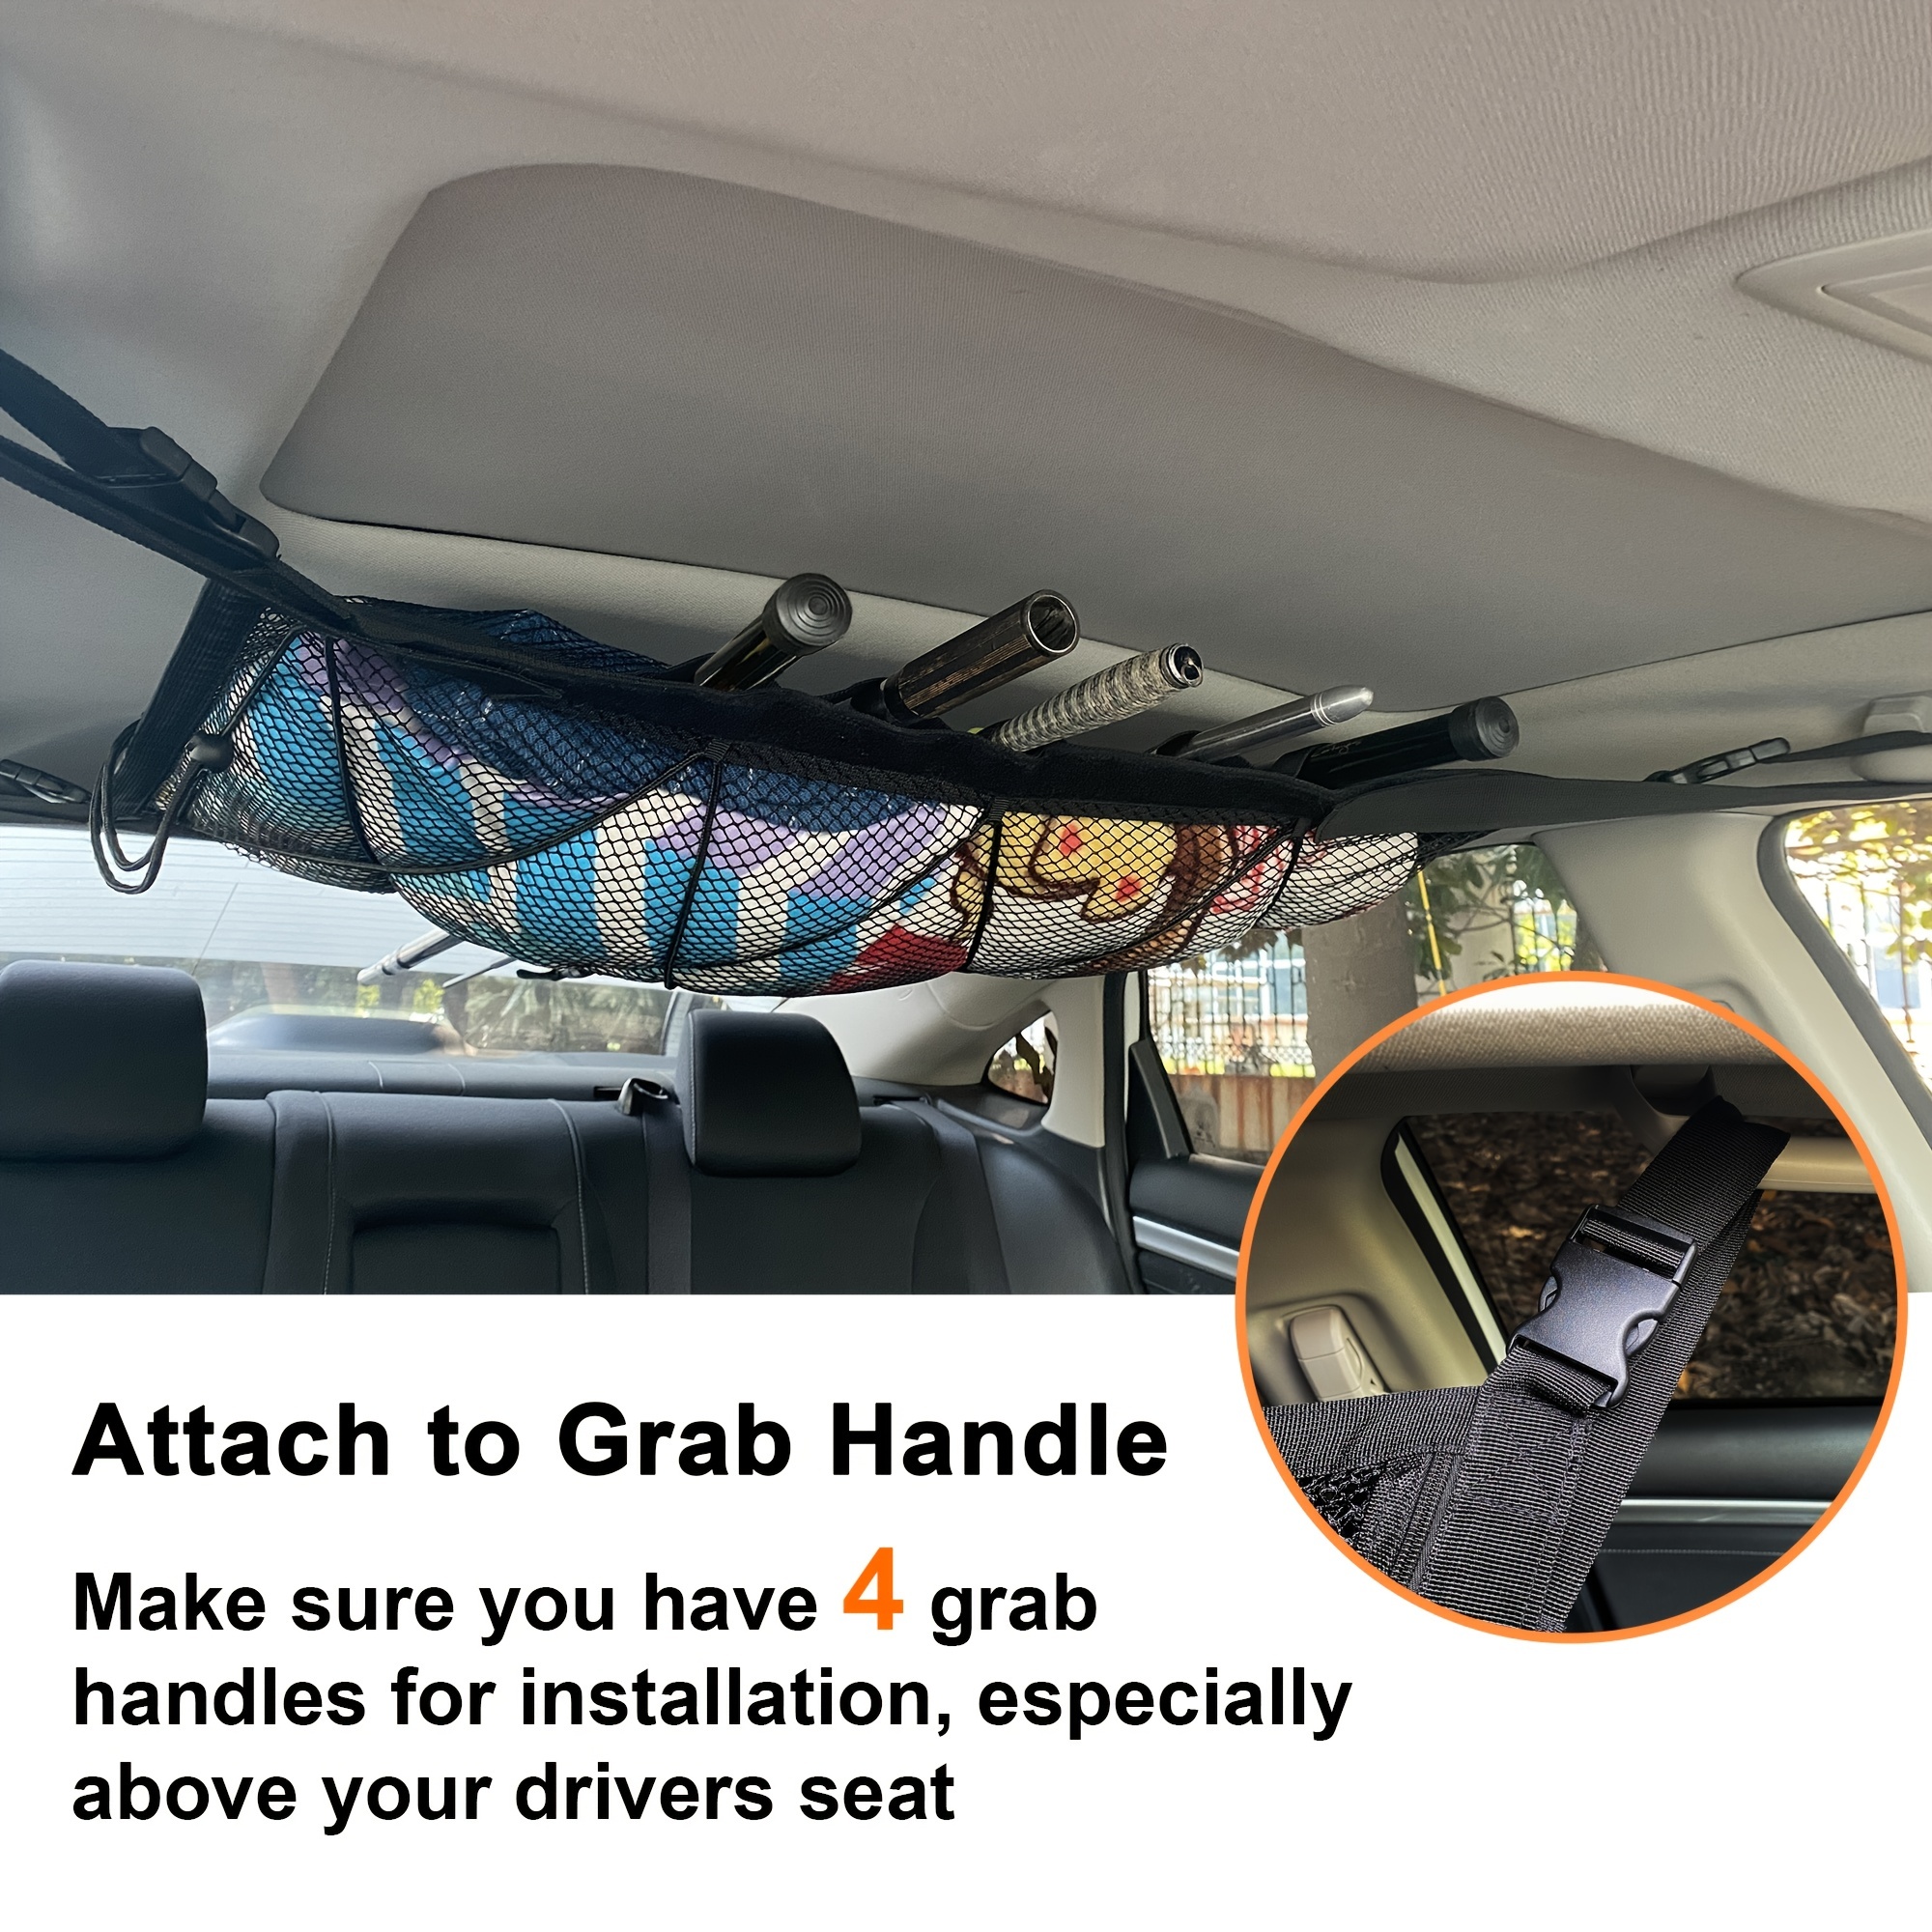 SUV Ceiling Storage Net With Fishing Rod Holder, Interior Car Roof Mesh  Storage Rack For Outdoor Fishing